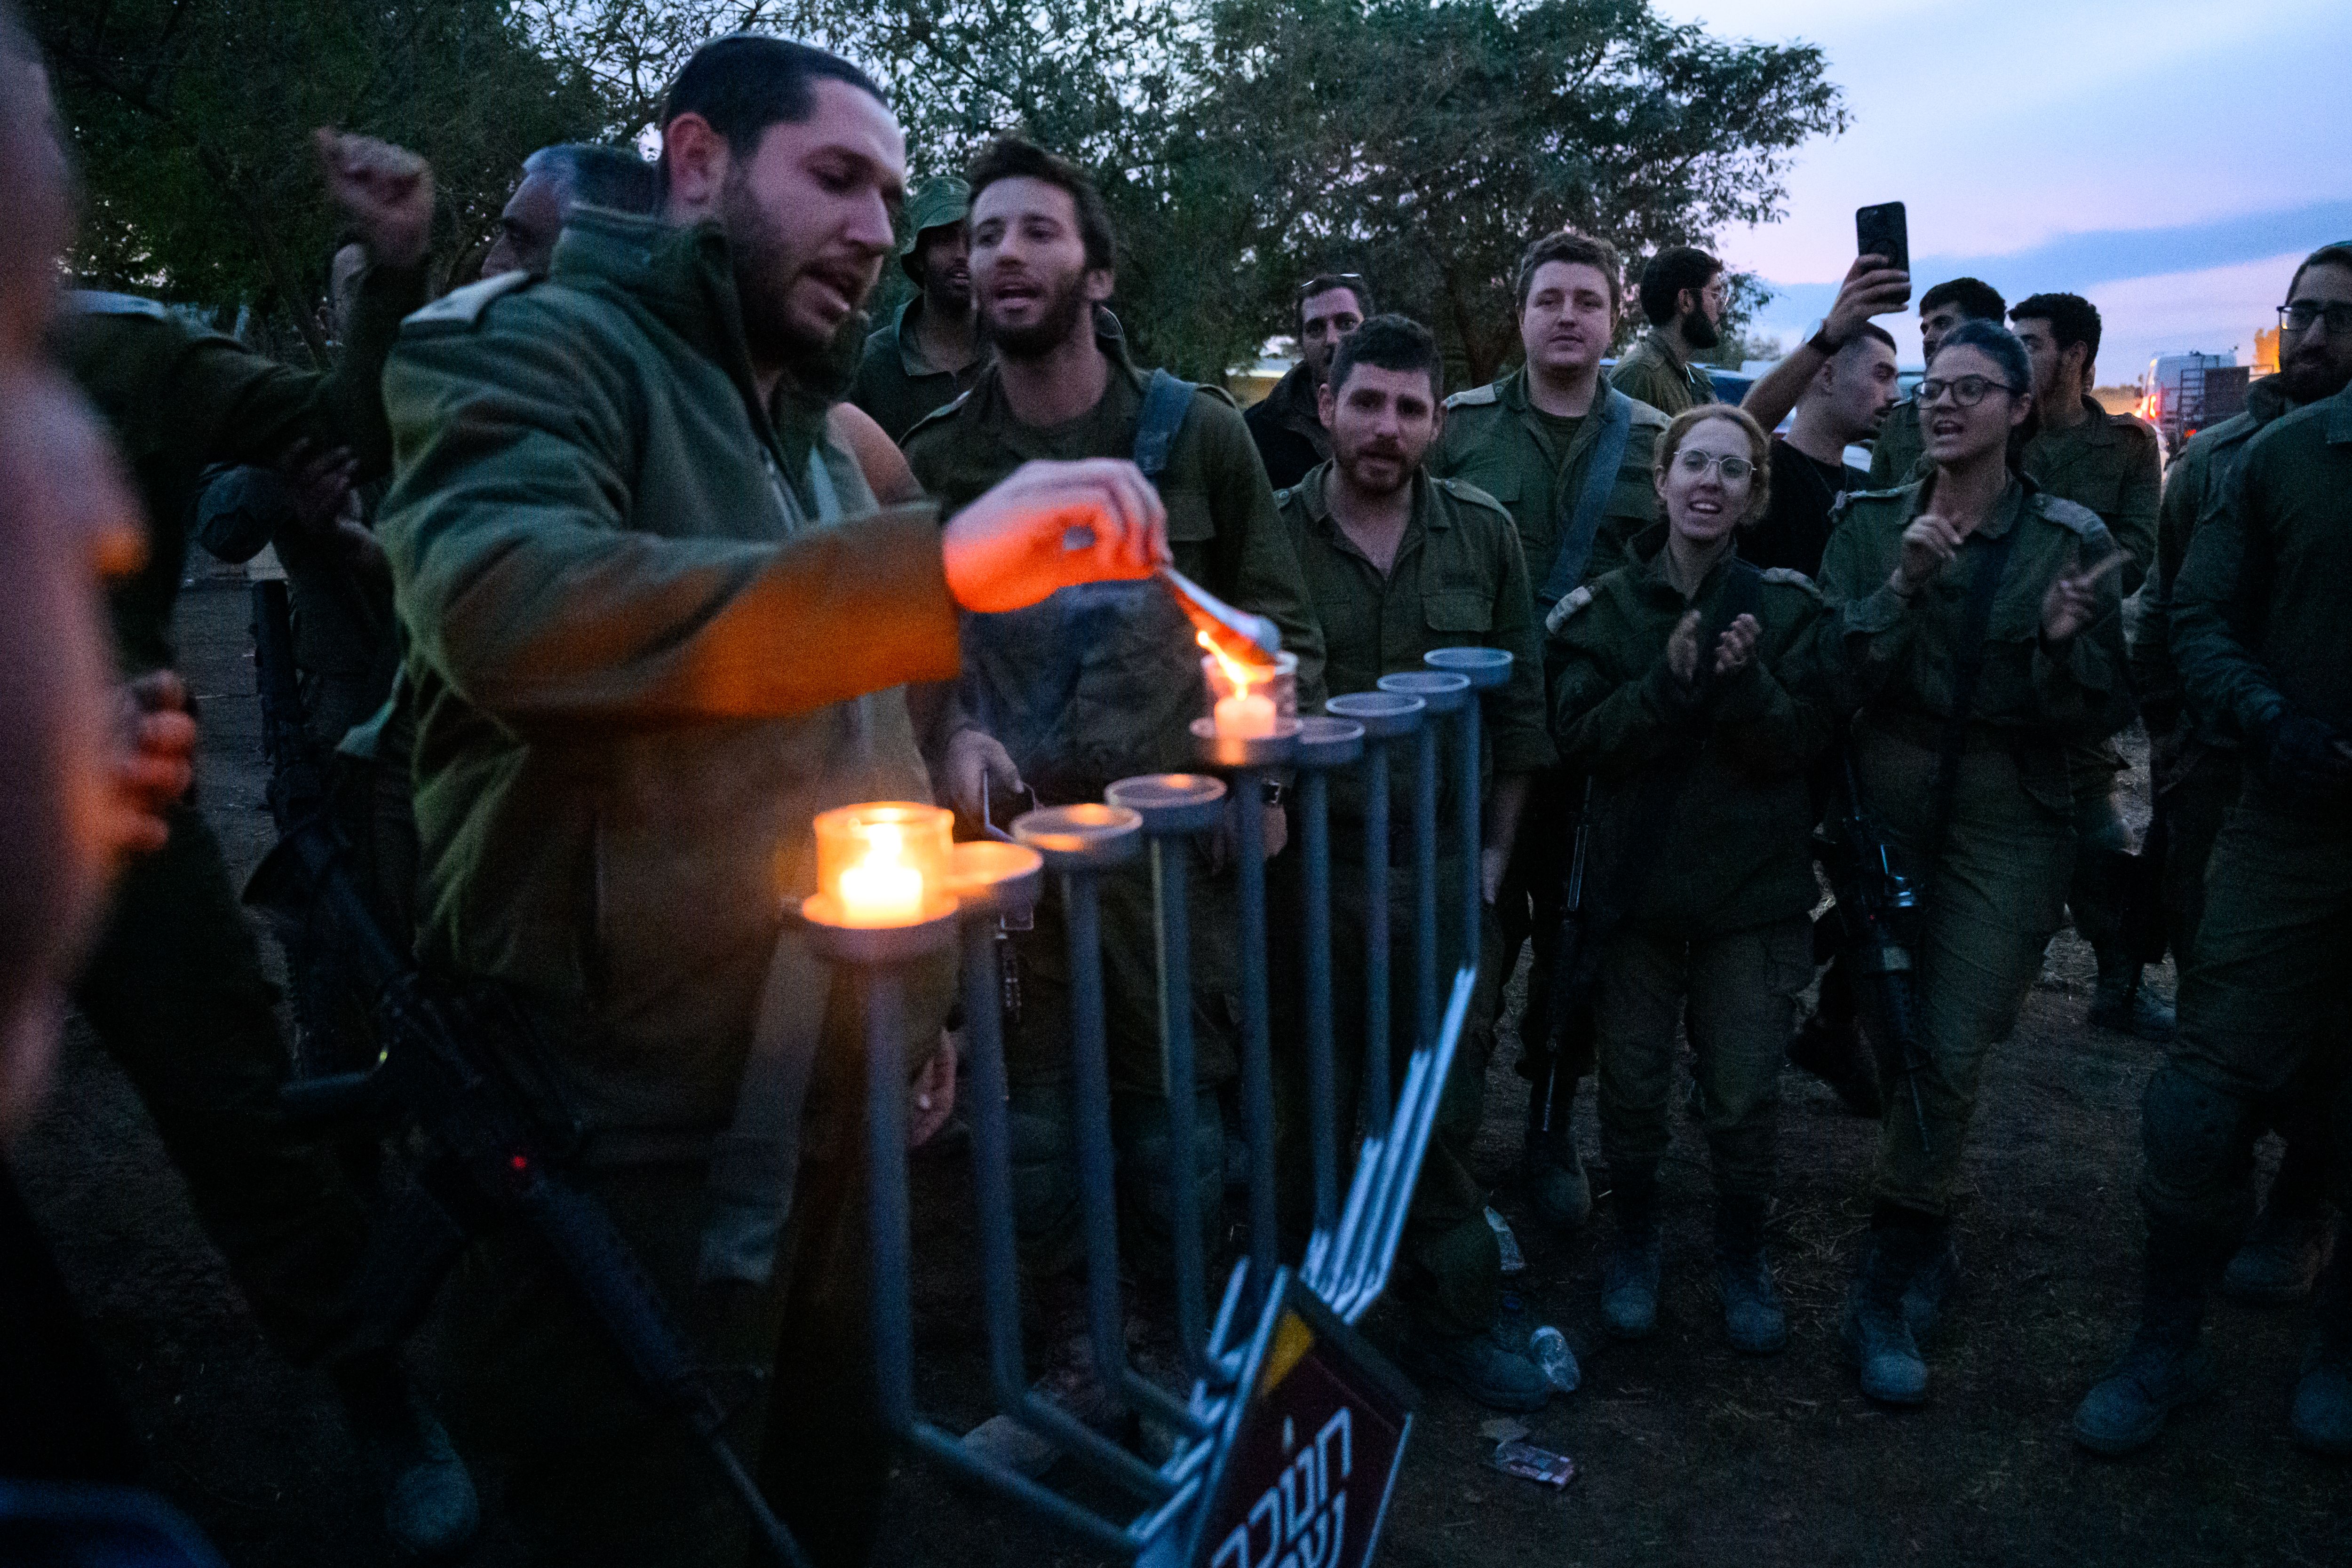  IDF soldiers light Hanukkah candles on the first night of Hanukkah near the Gaza border in Southern Israel.